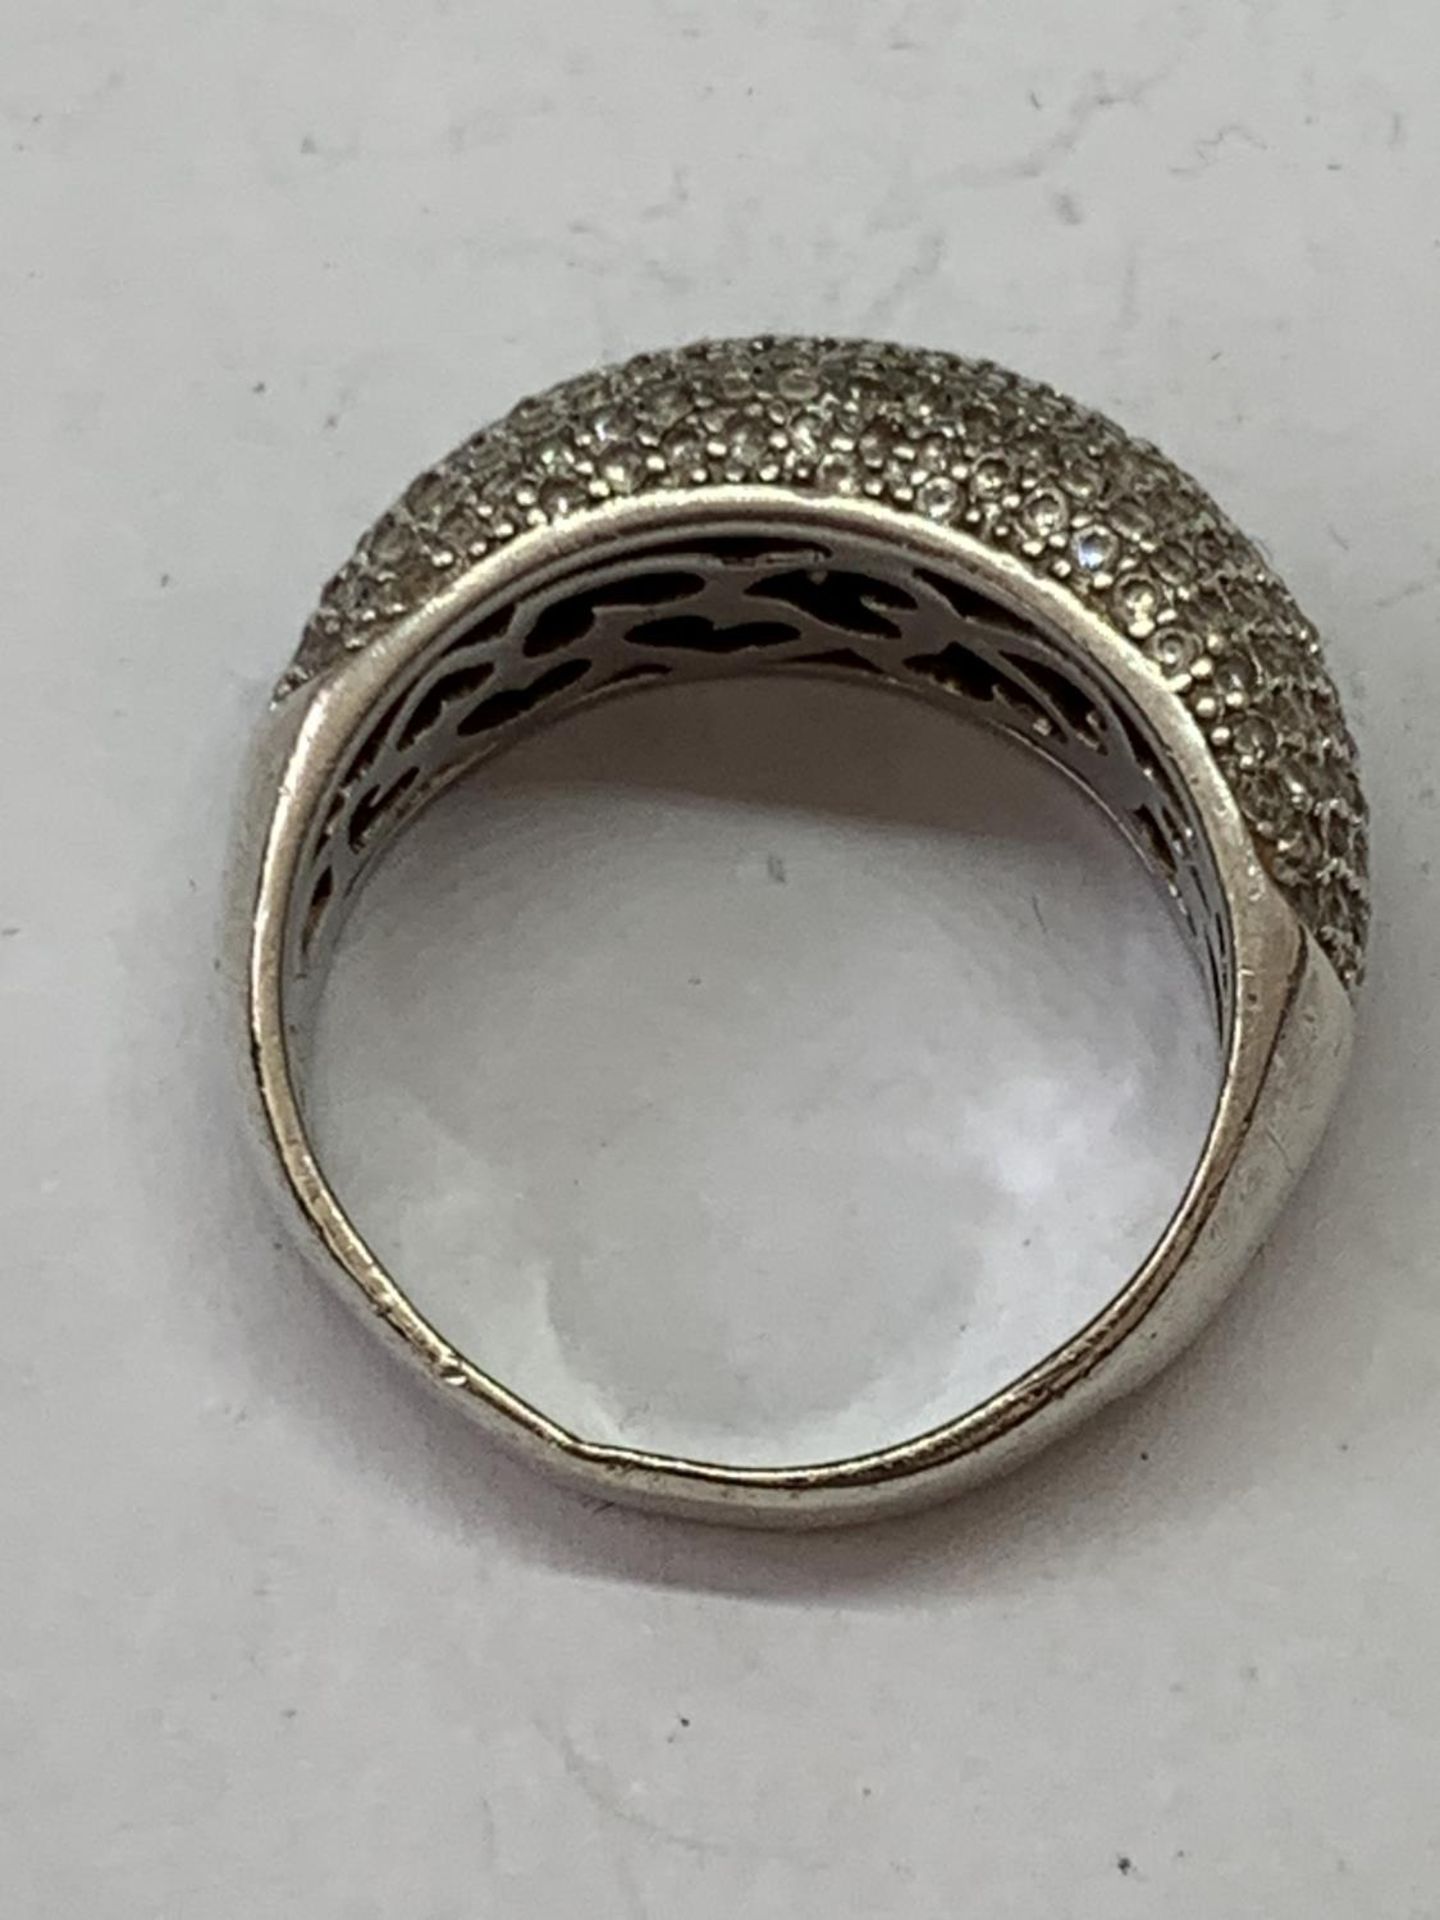 A SILVER RING IN A PRESENTATION BOX - Image 3 of 3